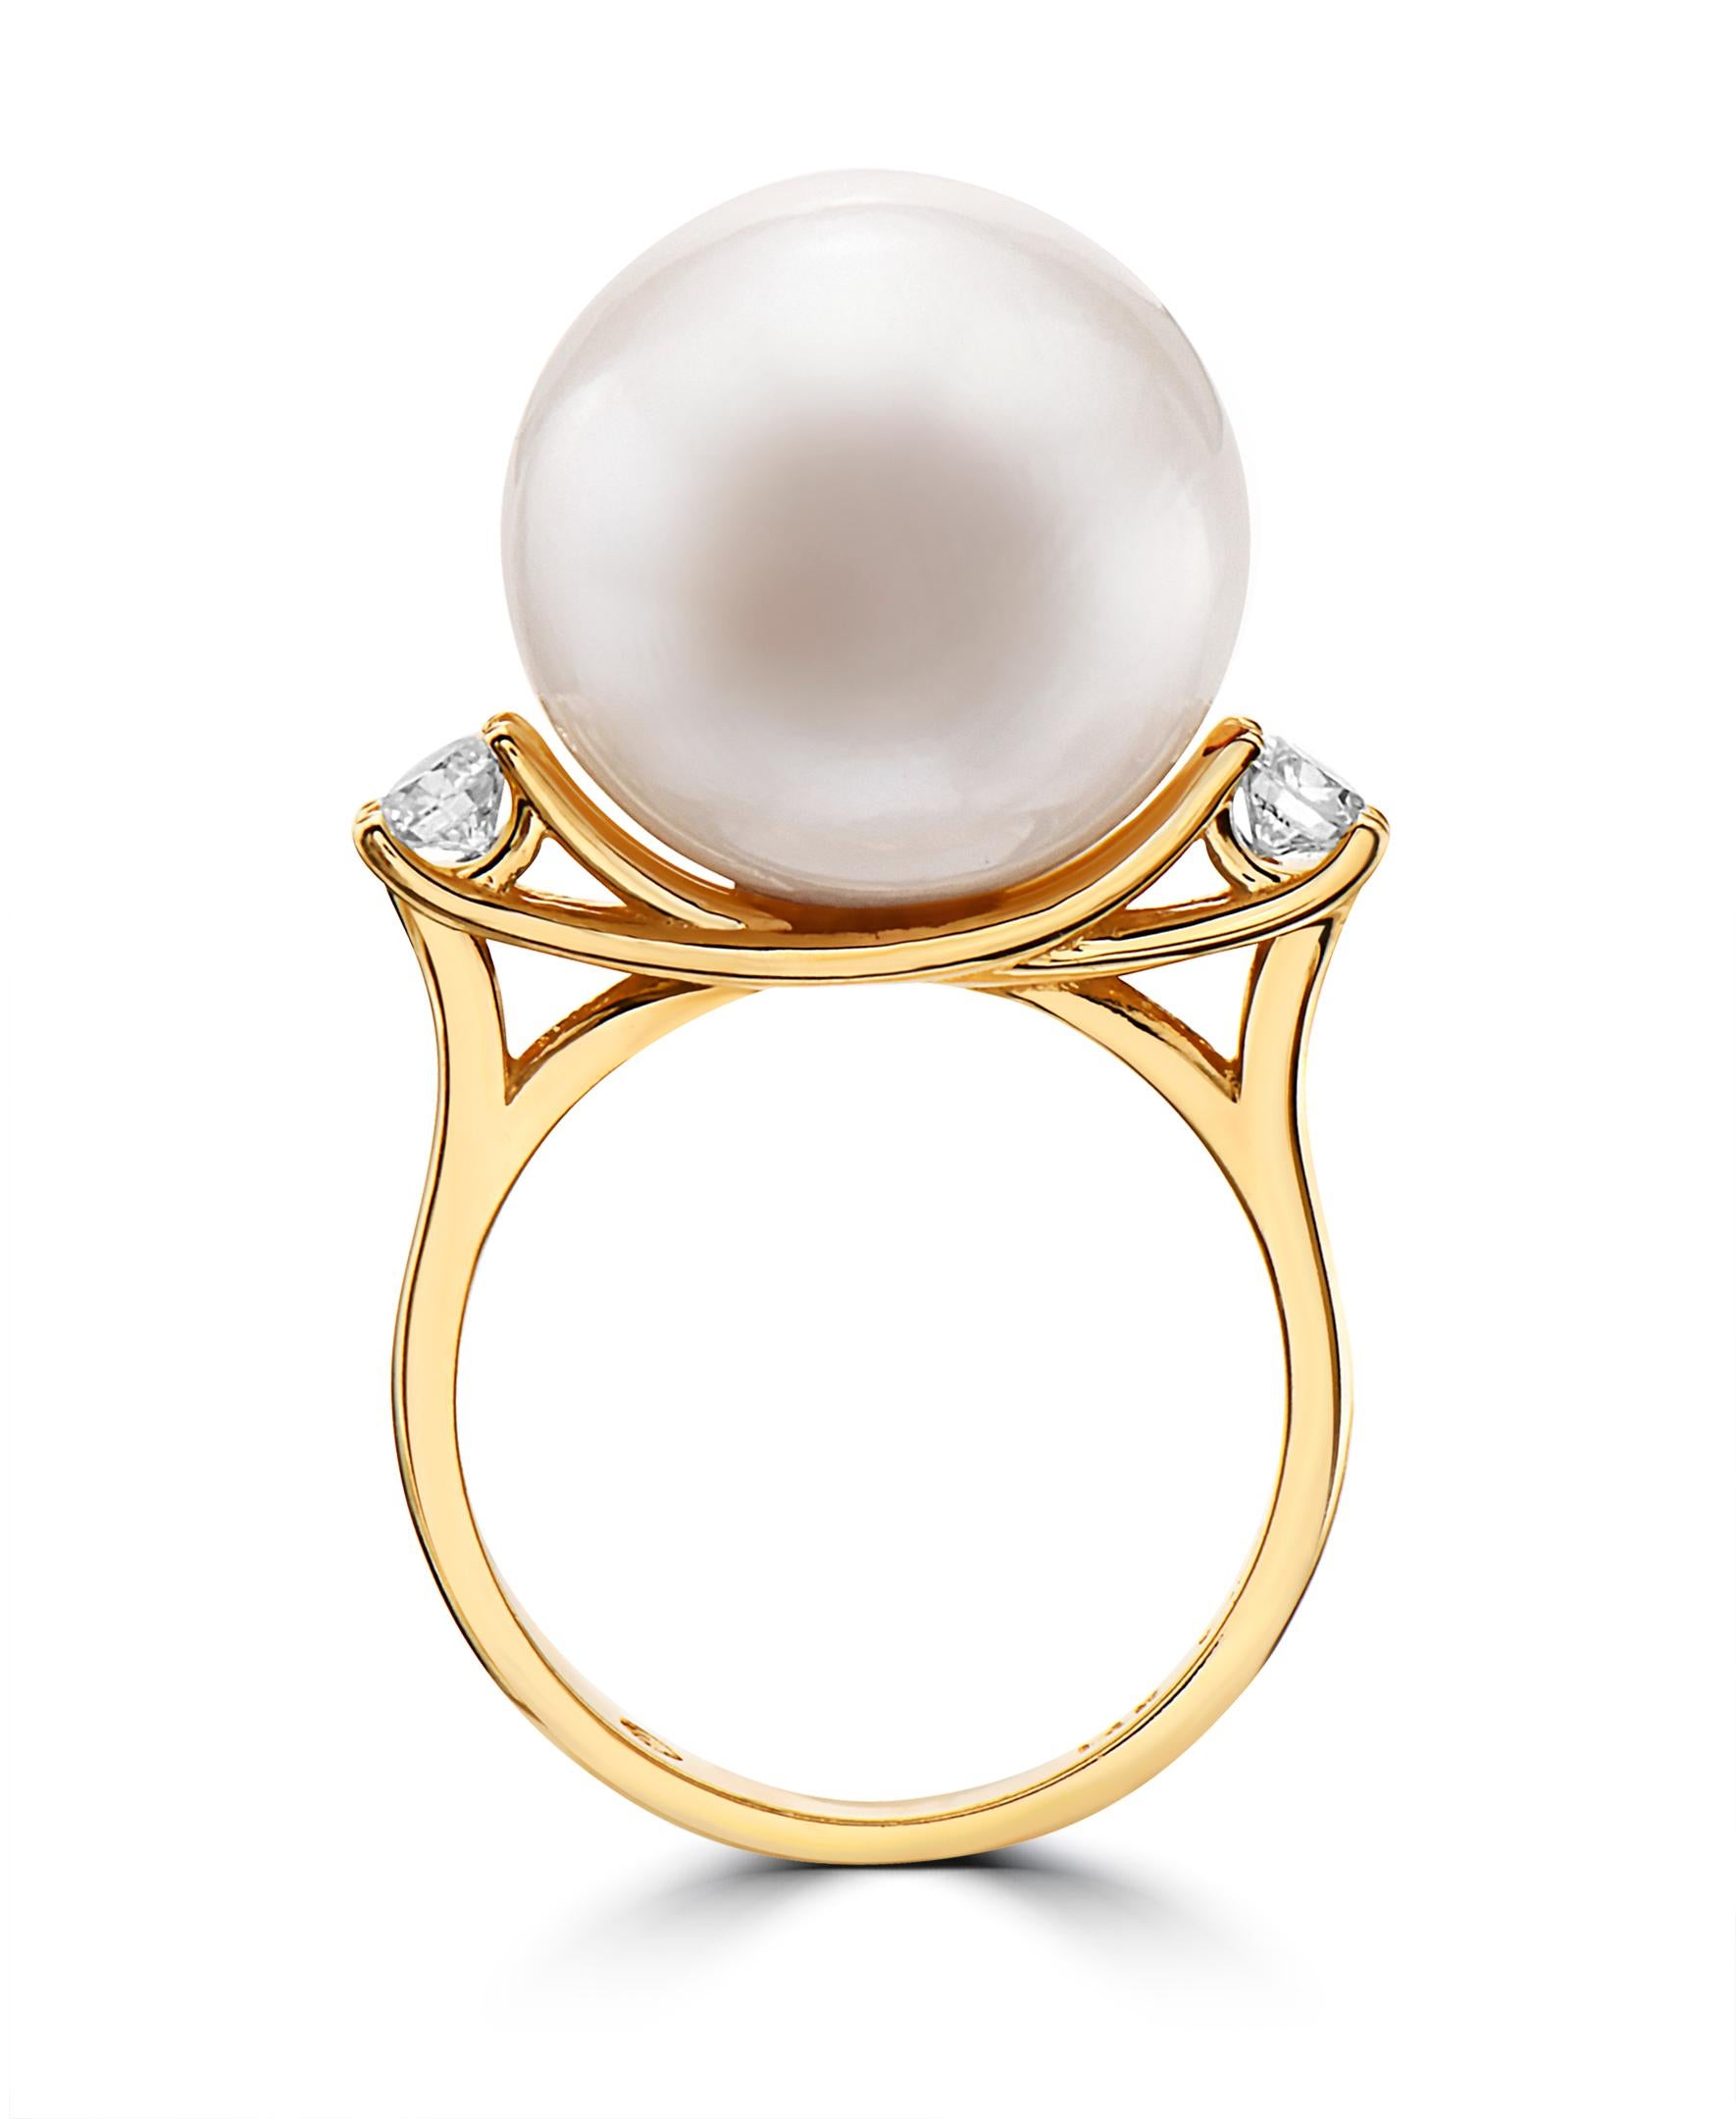 This Effy design features a large FW Pearl ring, sized at 15.5-16mm. Two round shape diamonds on the side have a total weight of 0.39ct.

The ring is a size 7.

Item number L177.